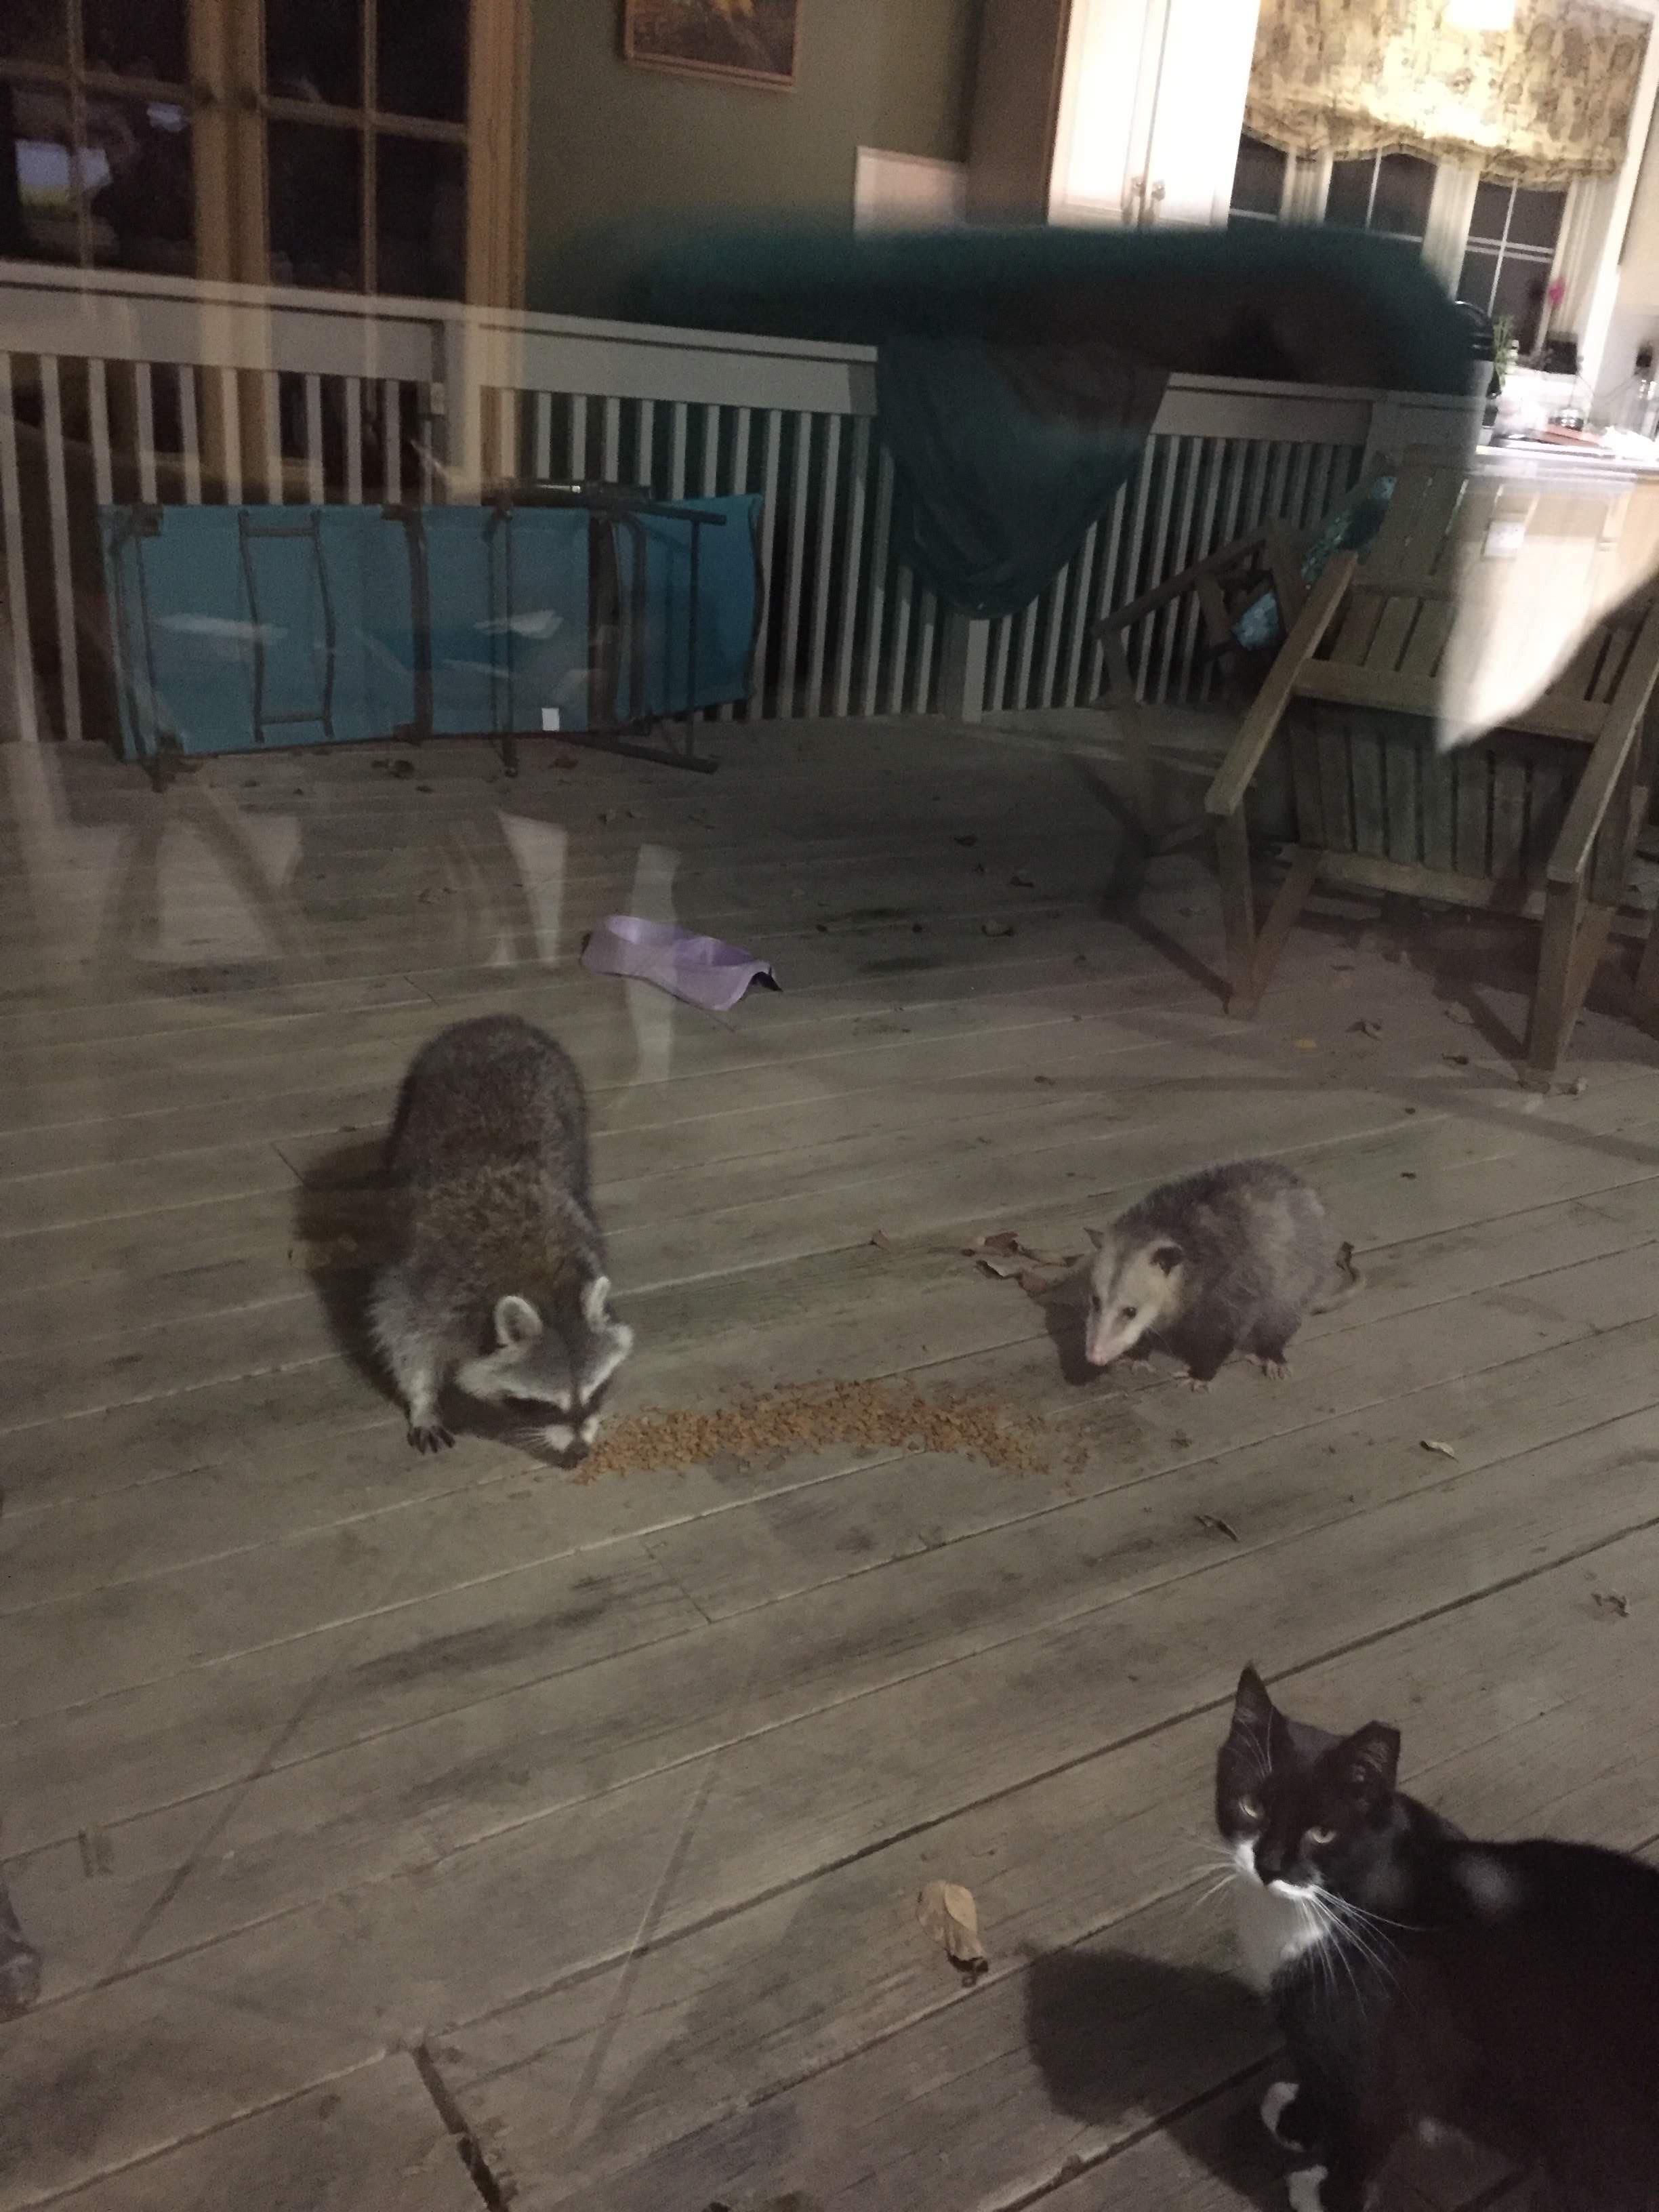 Unexpected visitors partaking of the cat food we put out for the strays.